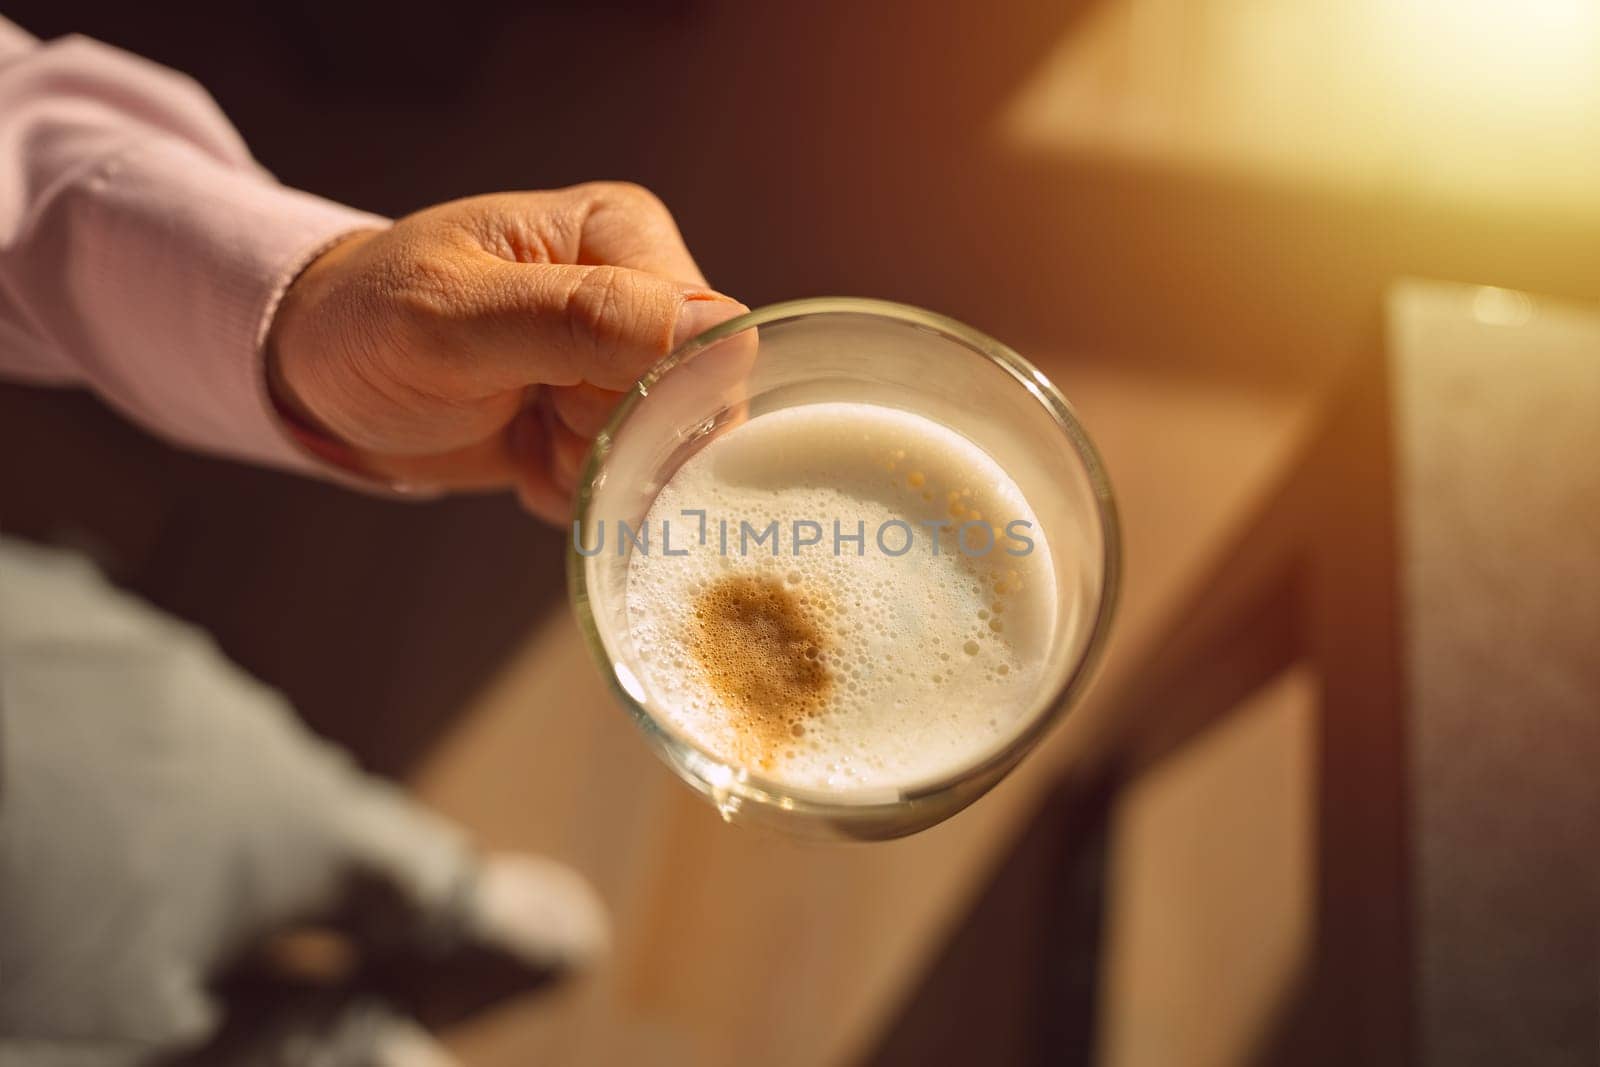 A cozy photo of a hand holding a cup of cappuccino coffee. The photo invokes warm feelings associated with sipping hot drinks before working day. High quality photo